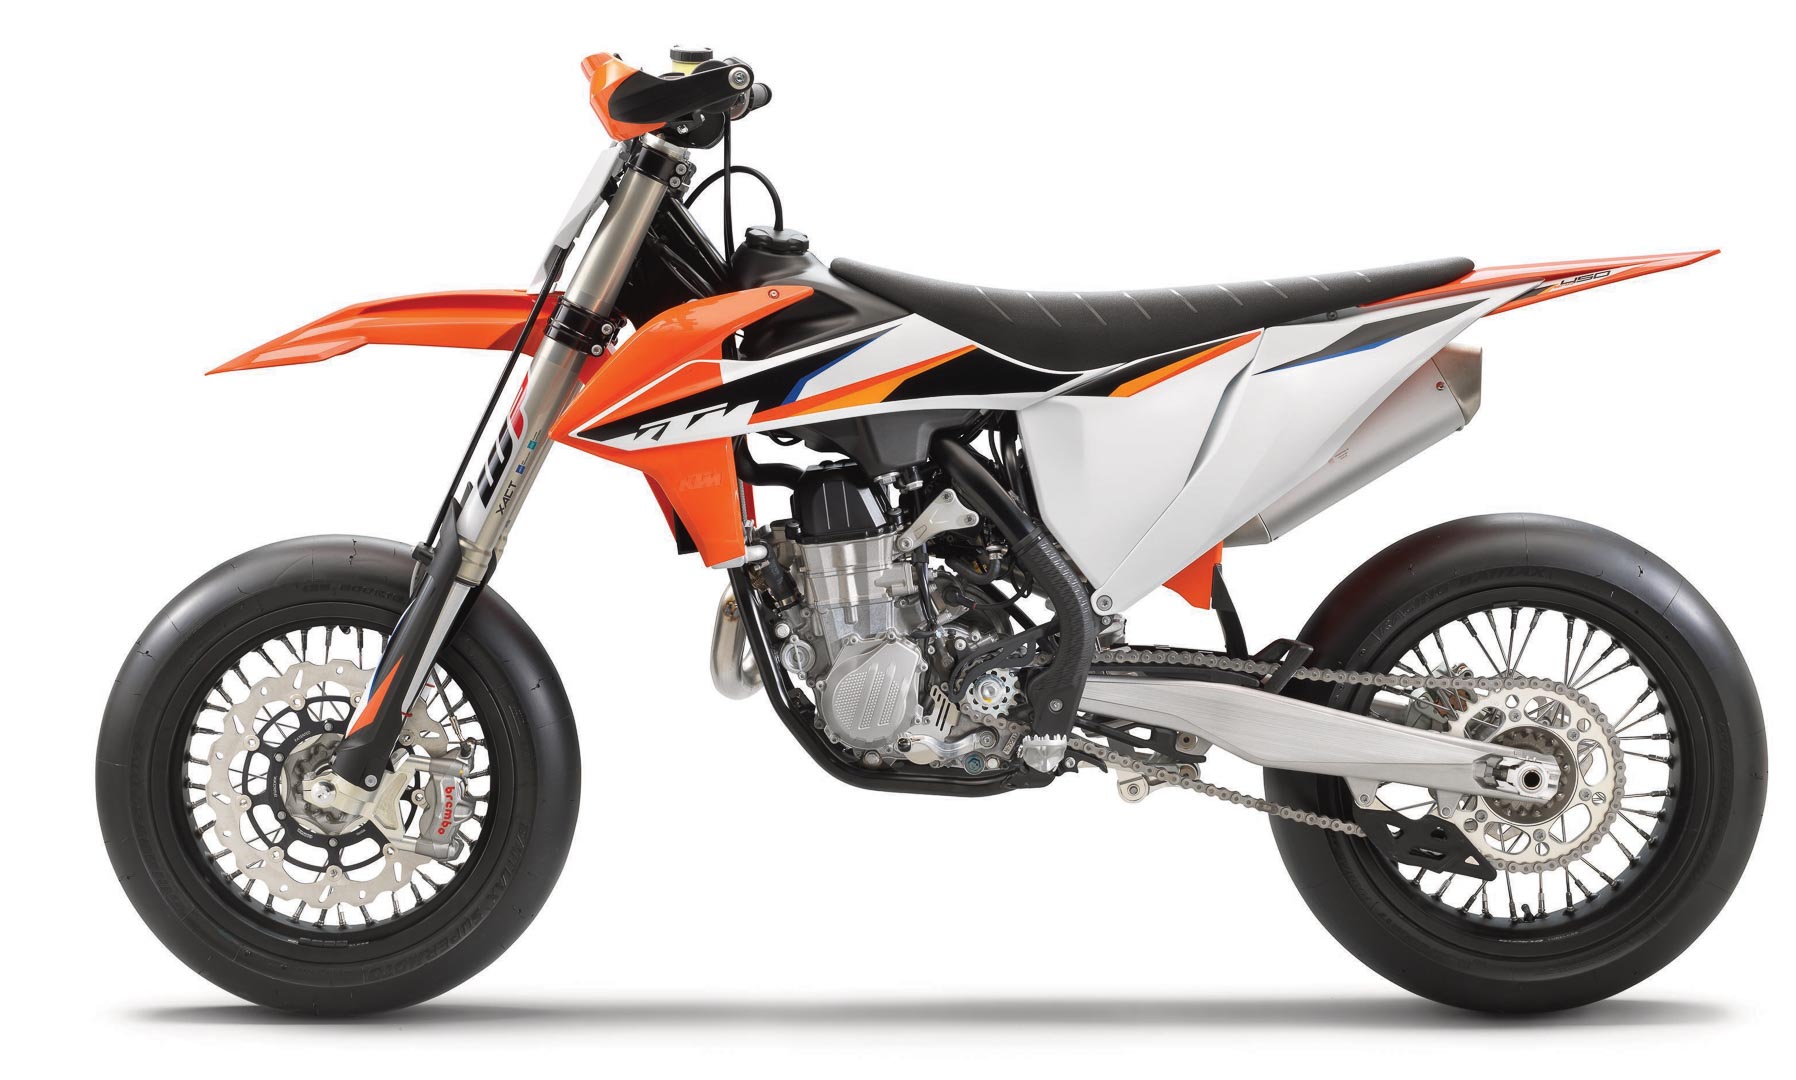 2021 KTM 450 SMR First Look supermoto racing motorcycle 5